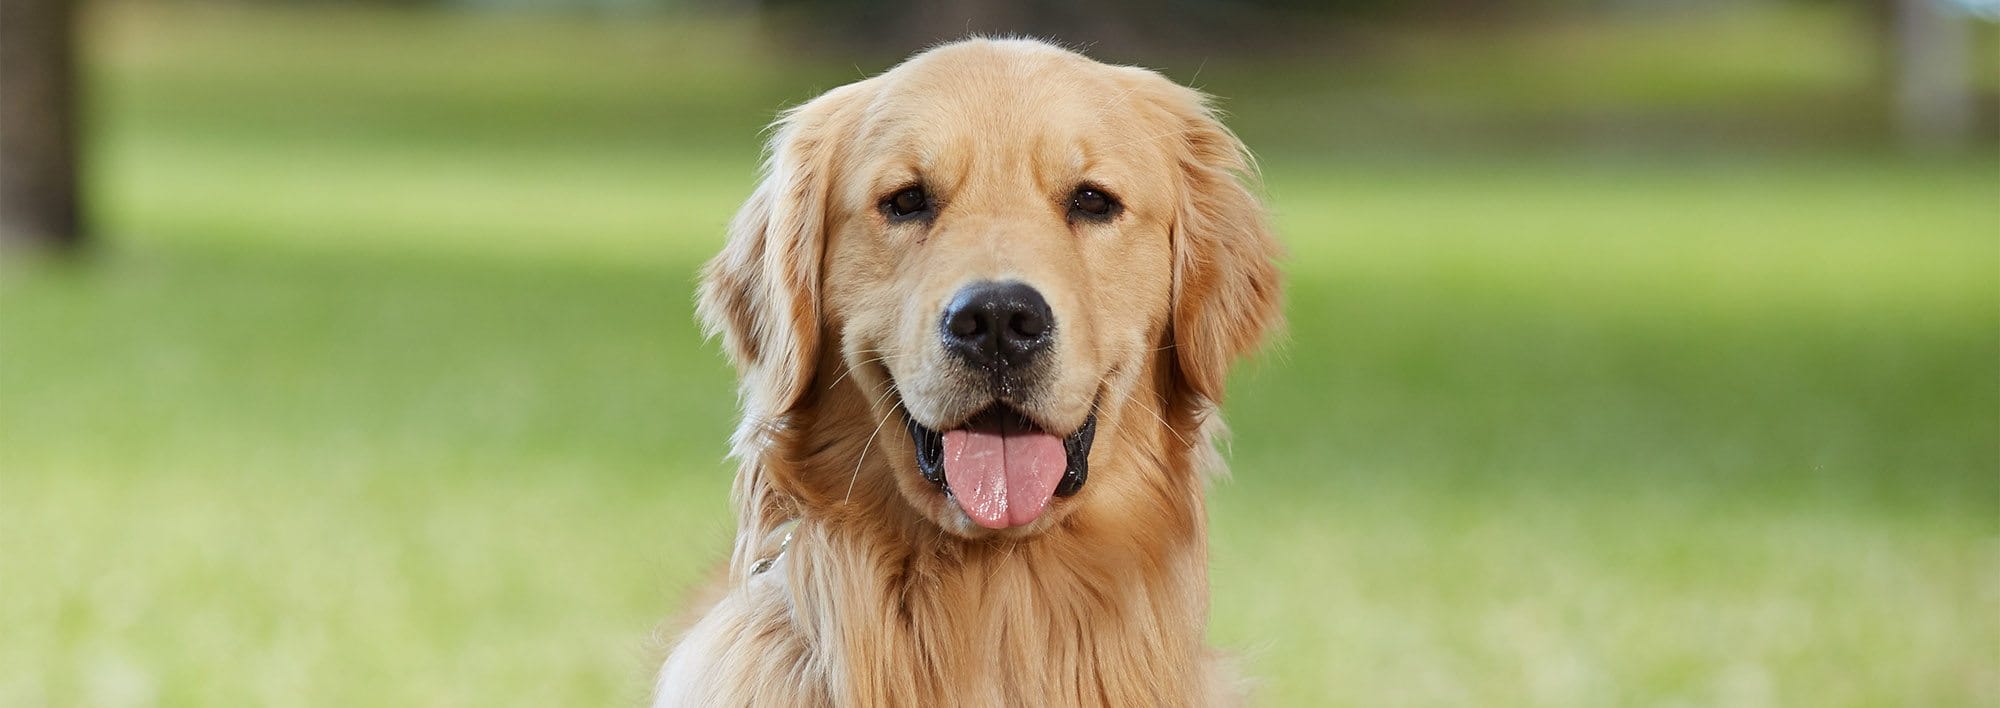 A golden retriever with his tongue hanging out a little bit looks directly at the camera. Behind him is a blurry field of grass and trees